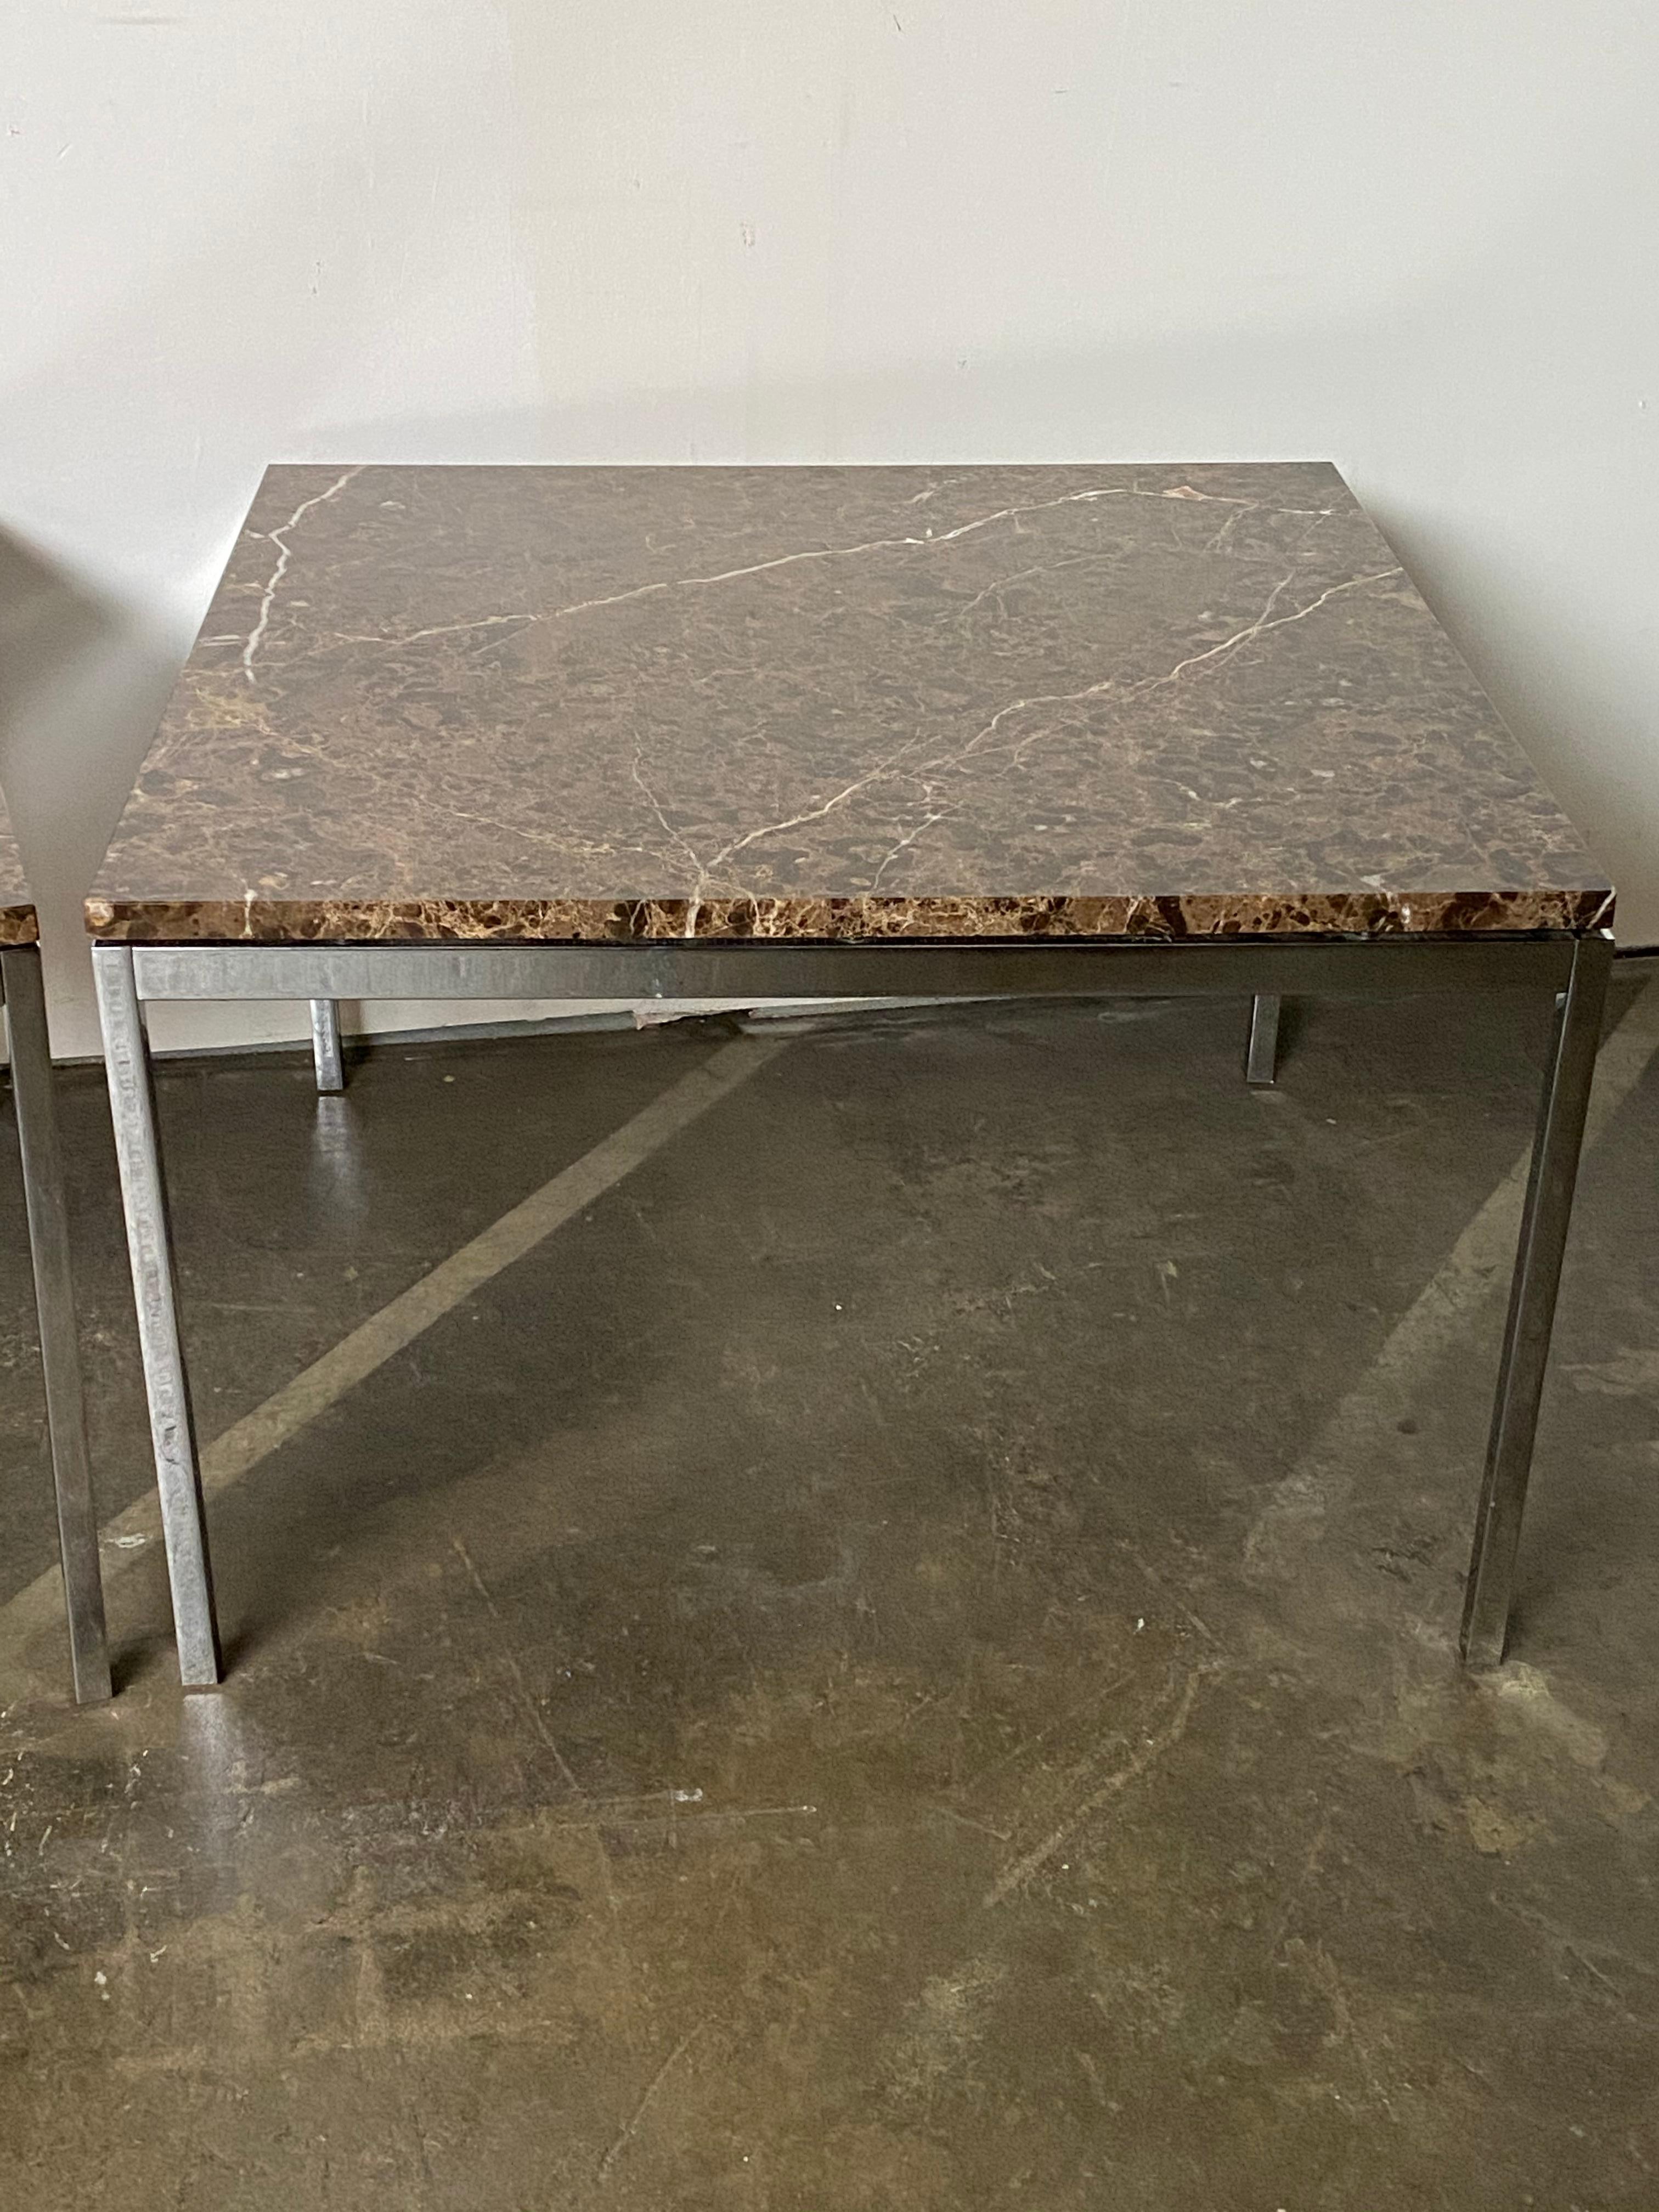 Amazing marble slabs adorn this matched pair of Florence Knoll end tables square cut stone with brilliant color and vein details atop chrome square tube frames. In very good condition with minimal signs of use. Stamped Knoll and guaranteed